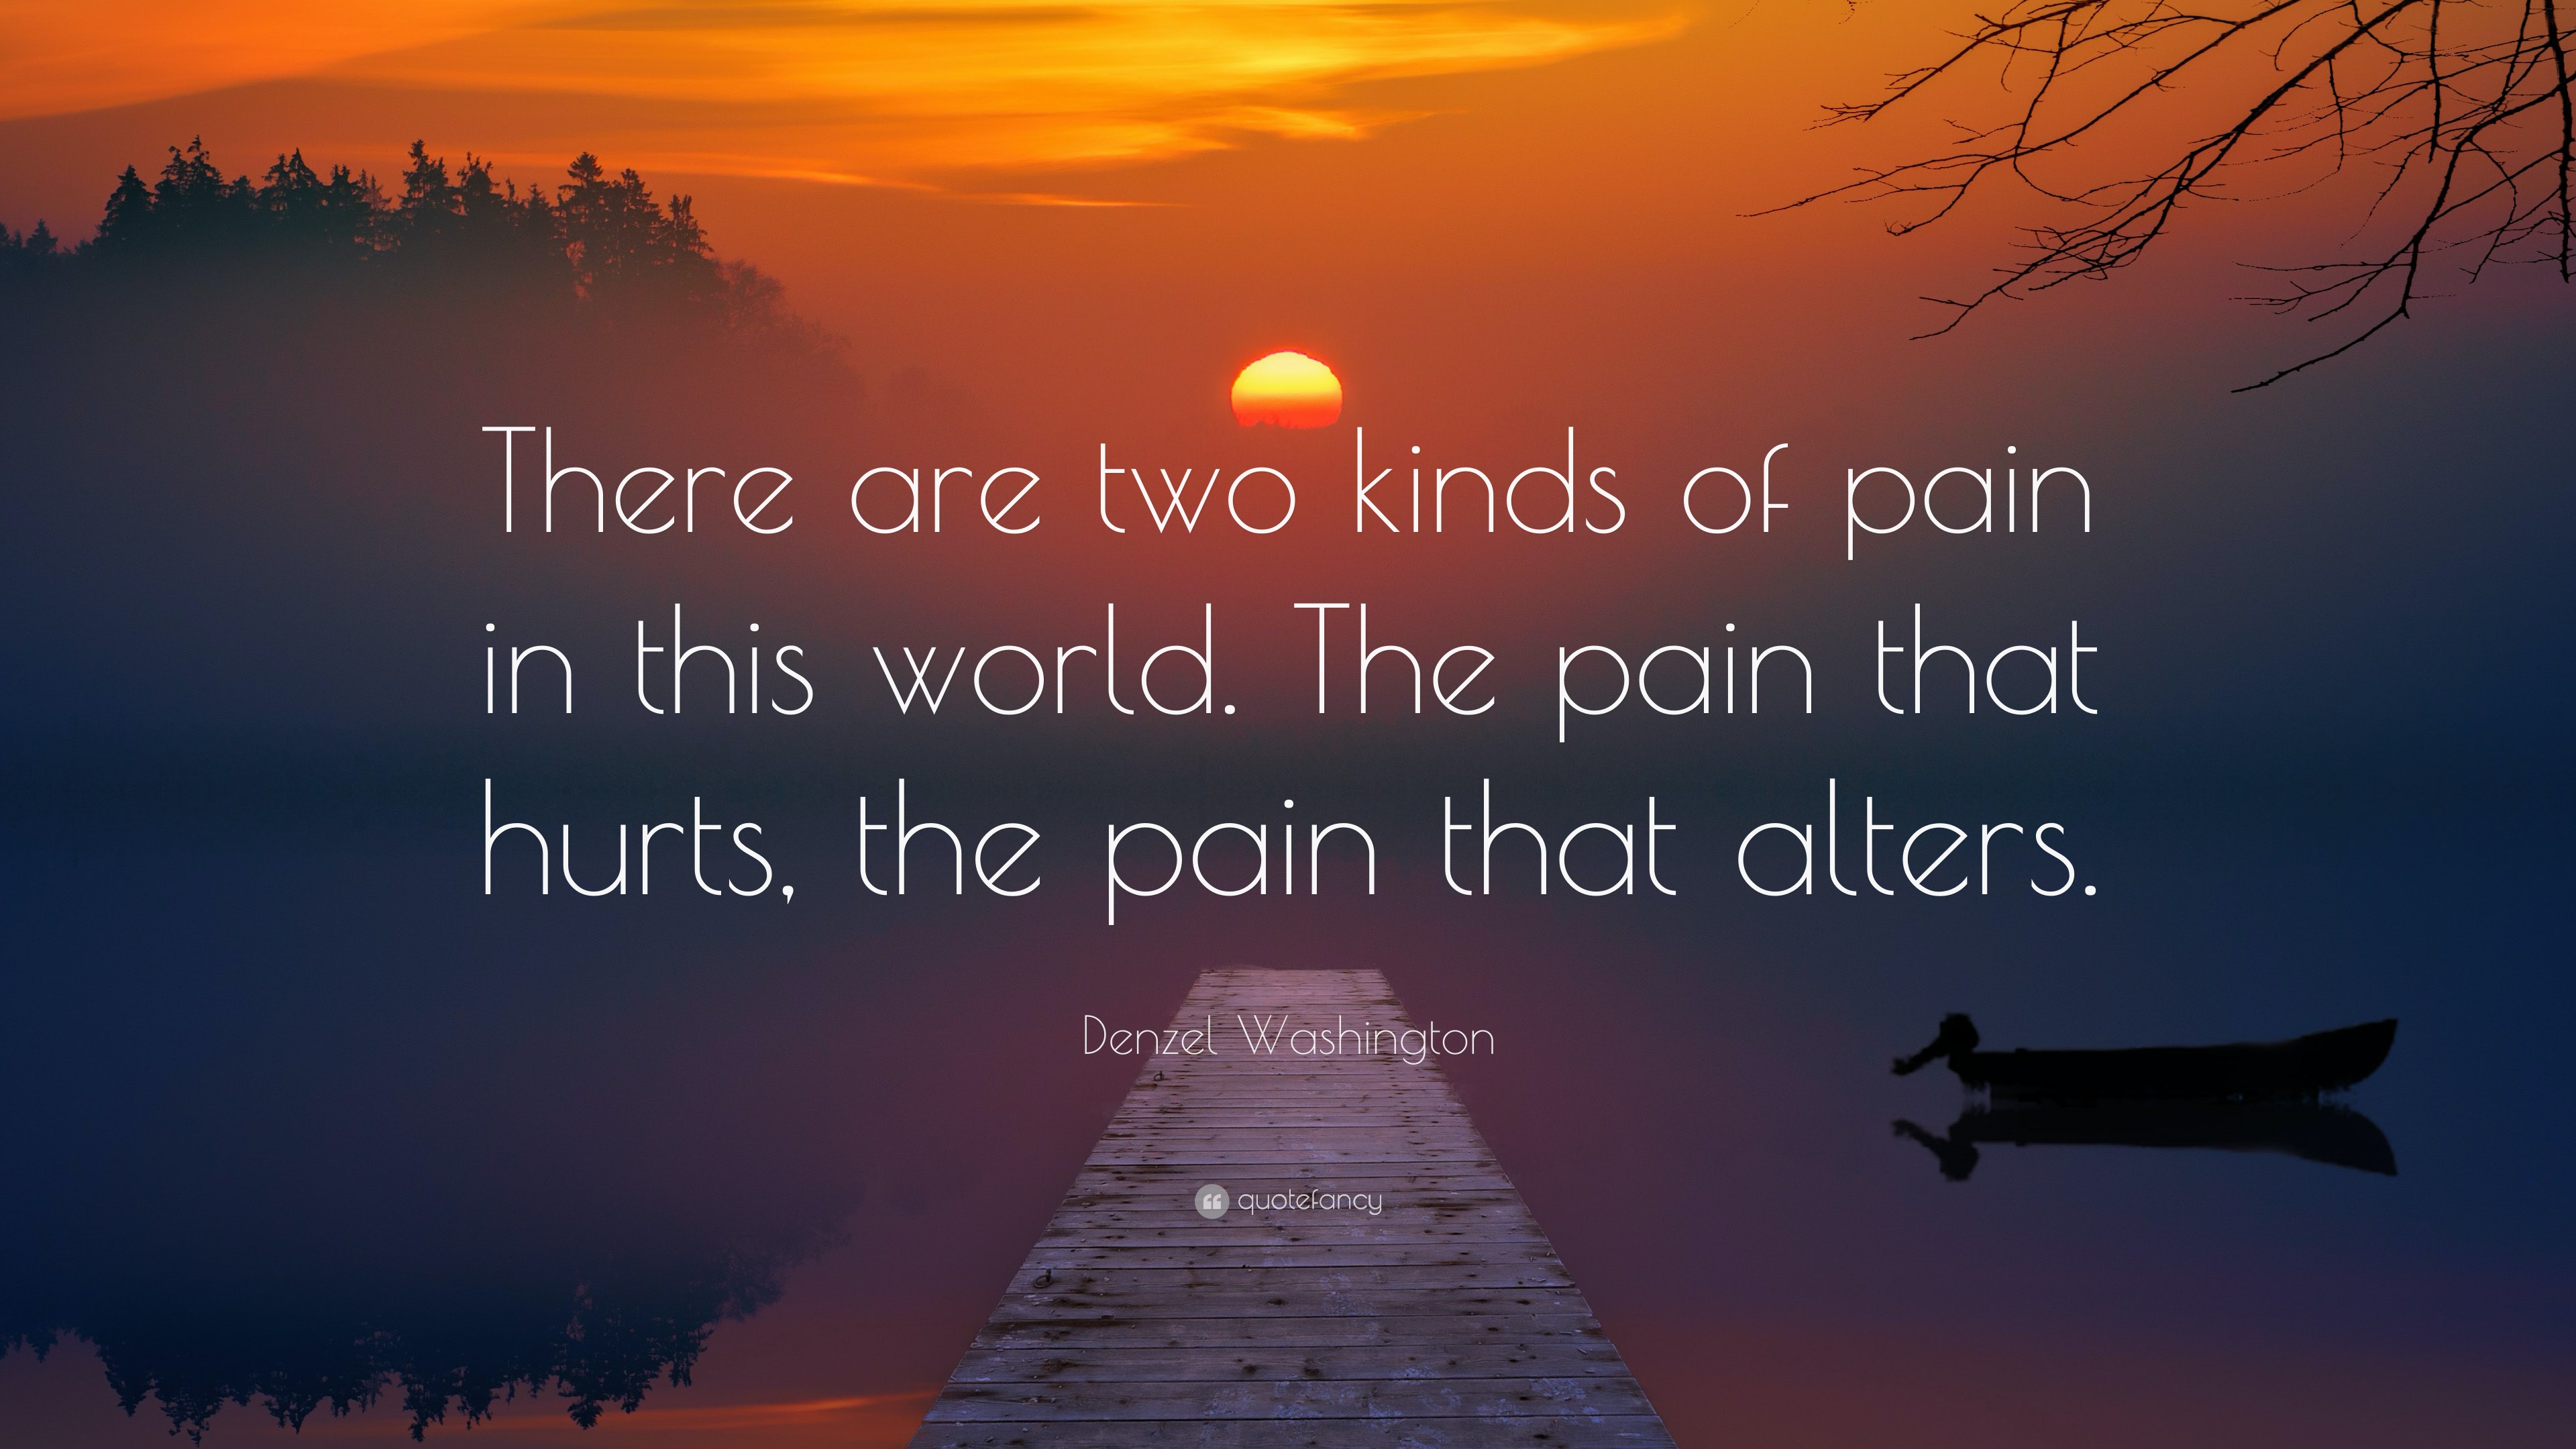 Denzel Washington Quote: “There are two kinds of pain in this world ...